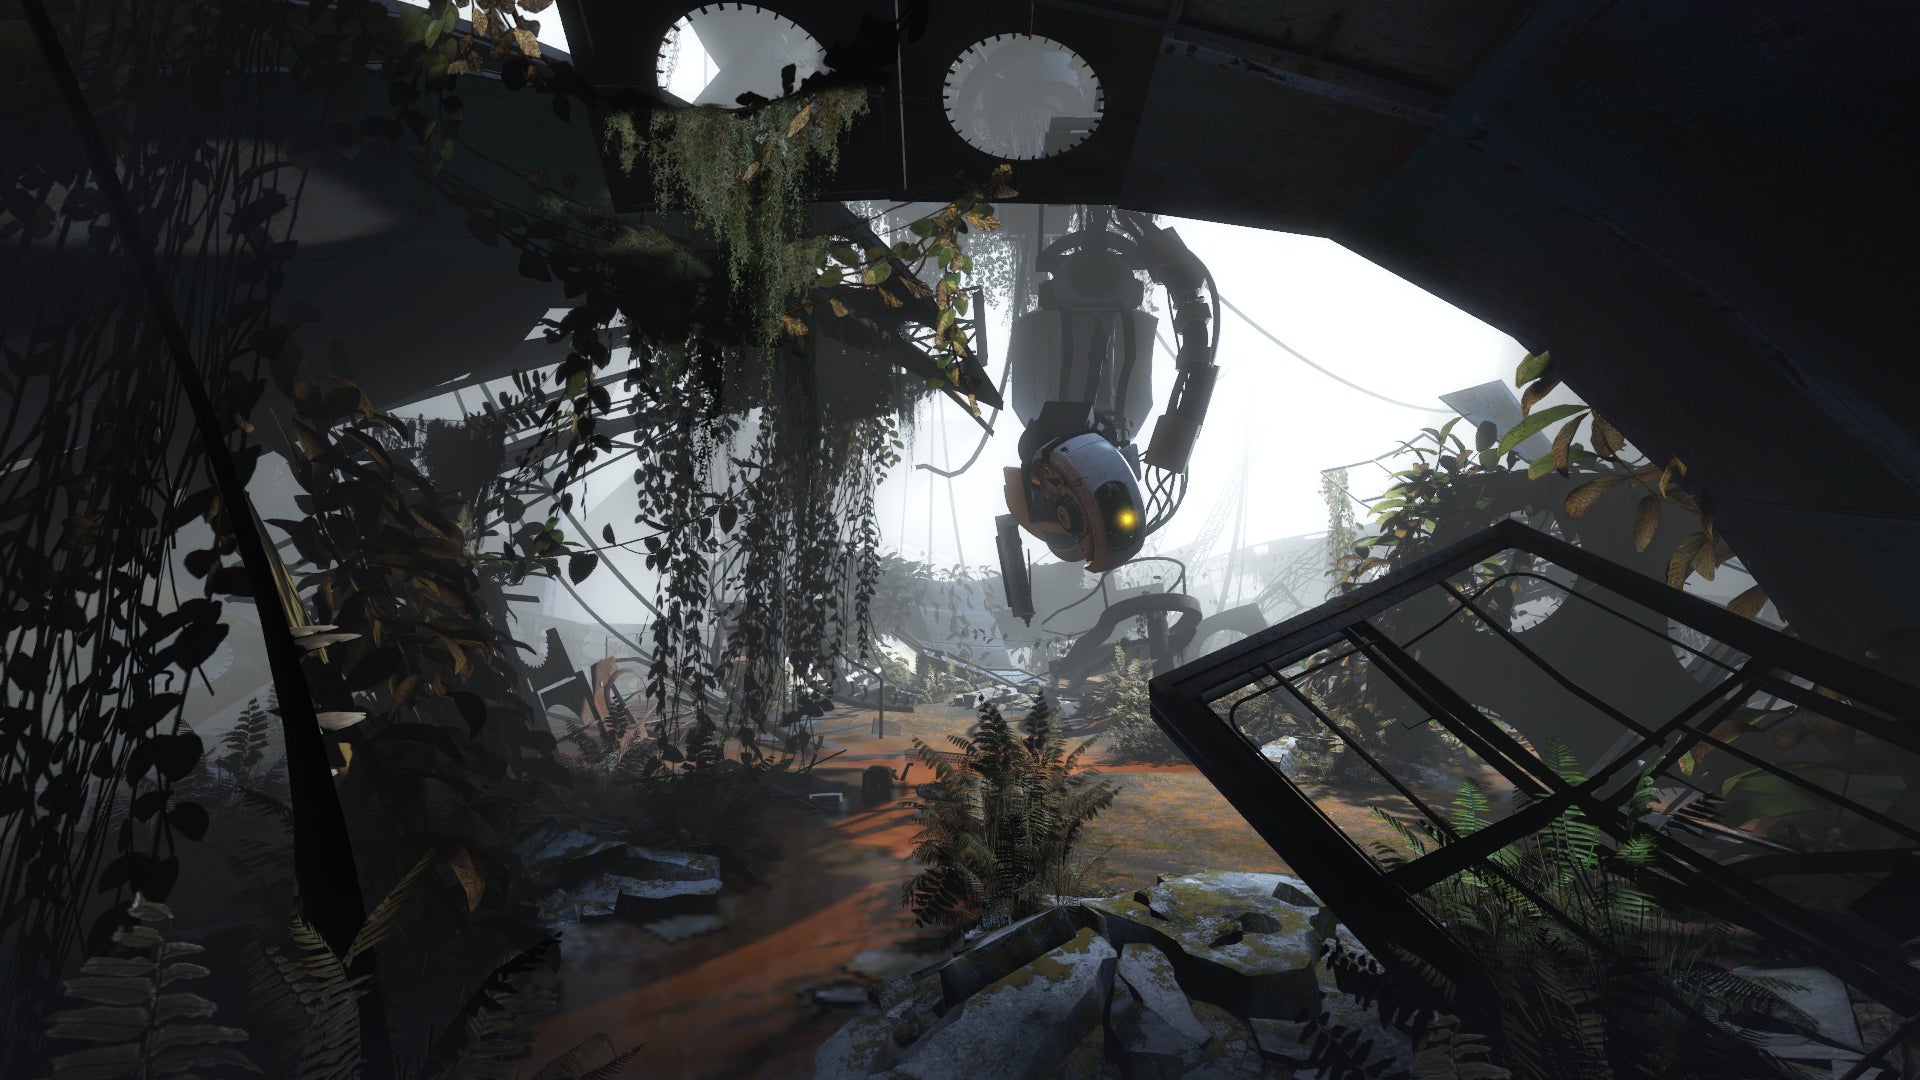 The robot arm inhabited by the AI GLaDOS in Portal 2, in an overgrown chamber full of vines